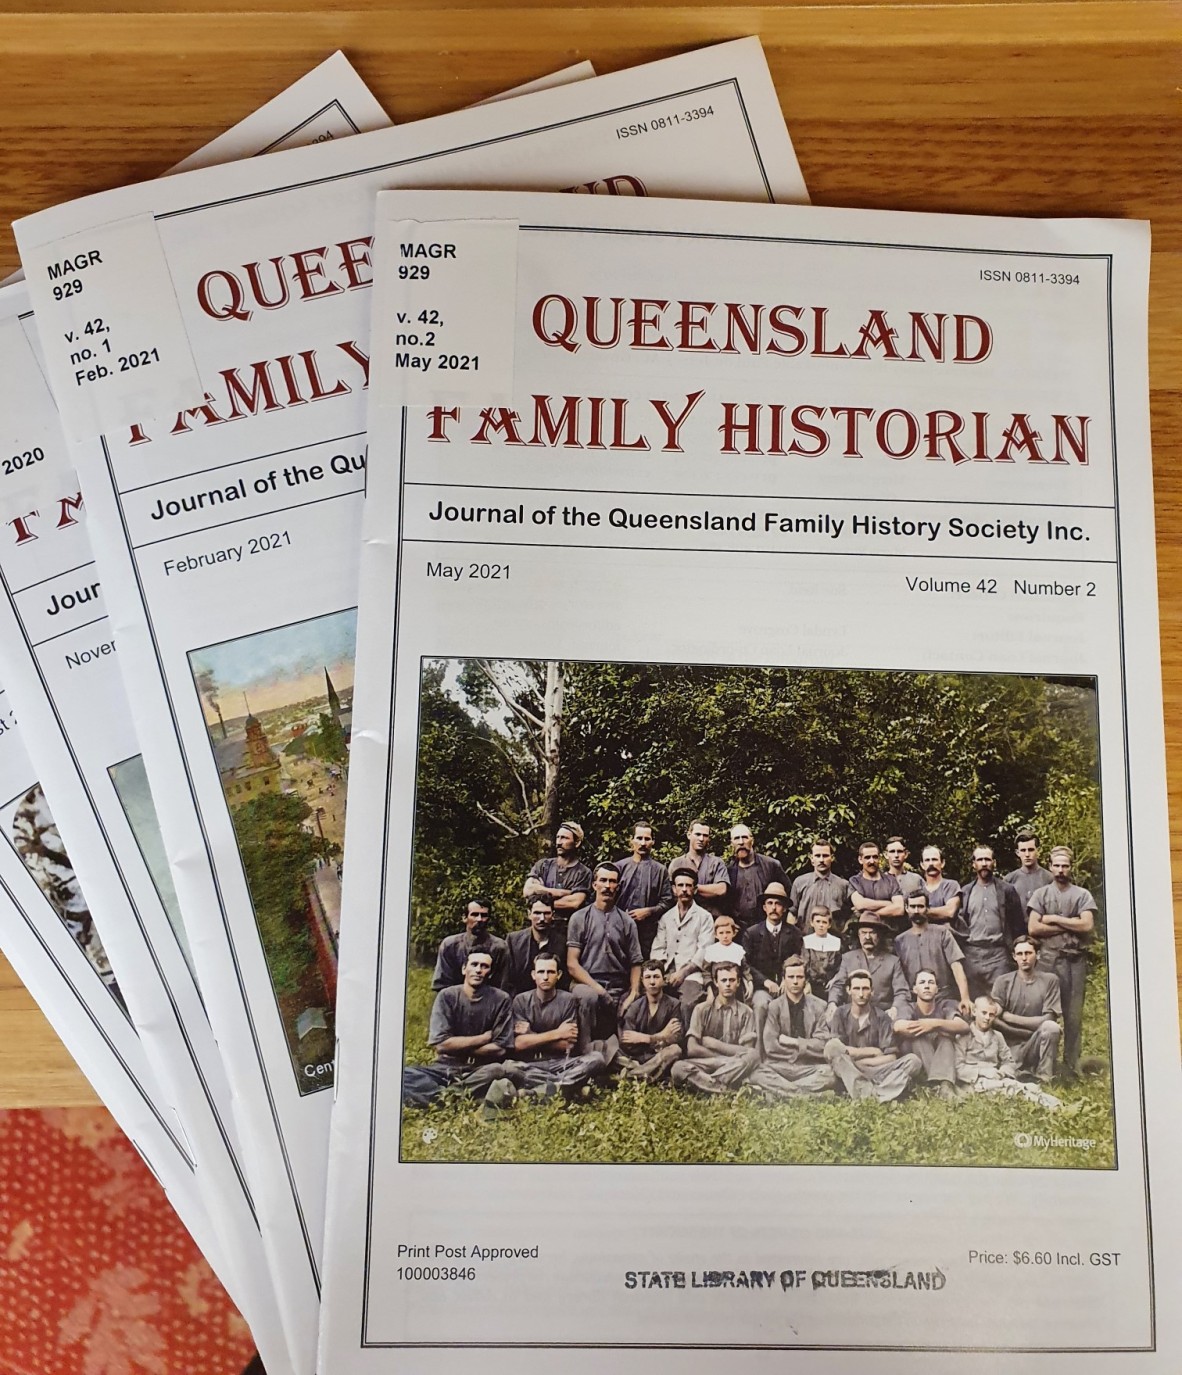 Image of front cover of Queensland Family Historian journal published by the Queensland Family History Society